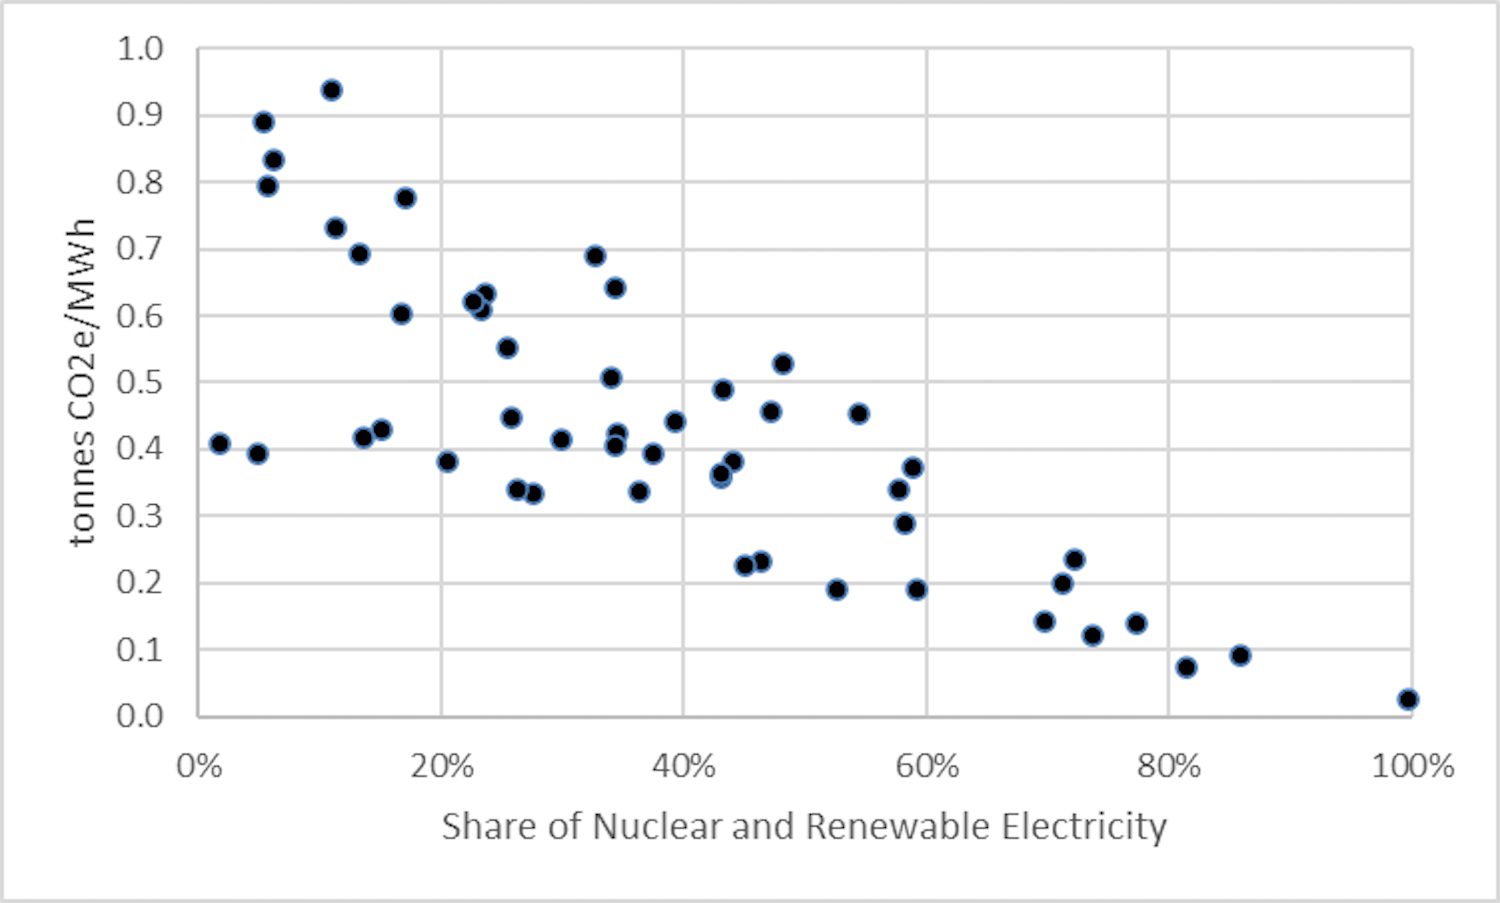 US State-Generation GHG Emissions Intensity Versus Clean Energy Share 2018